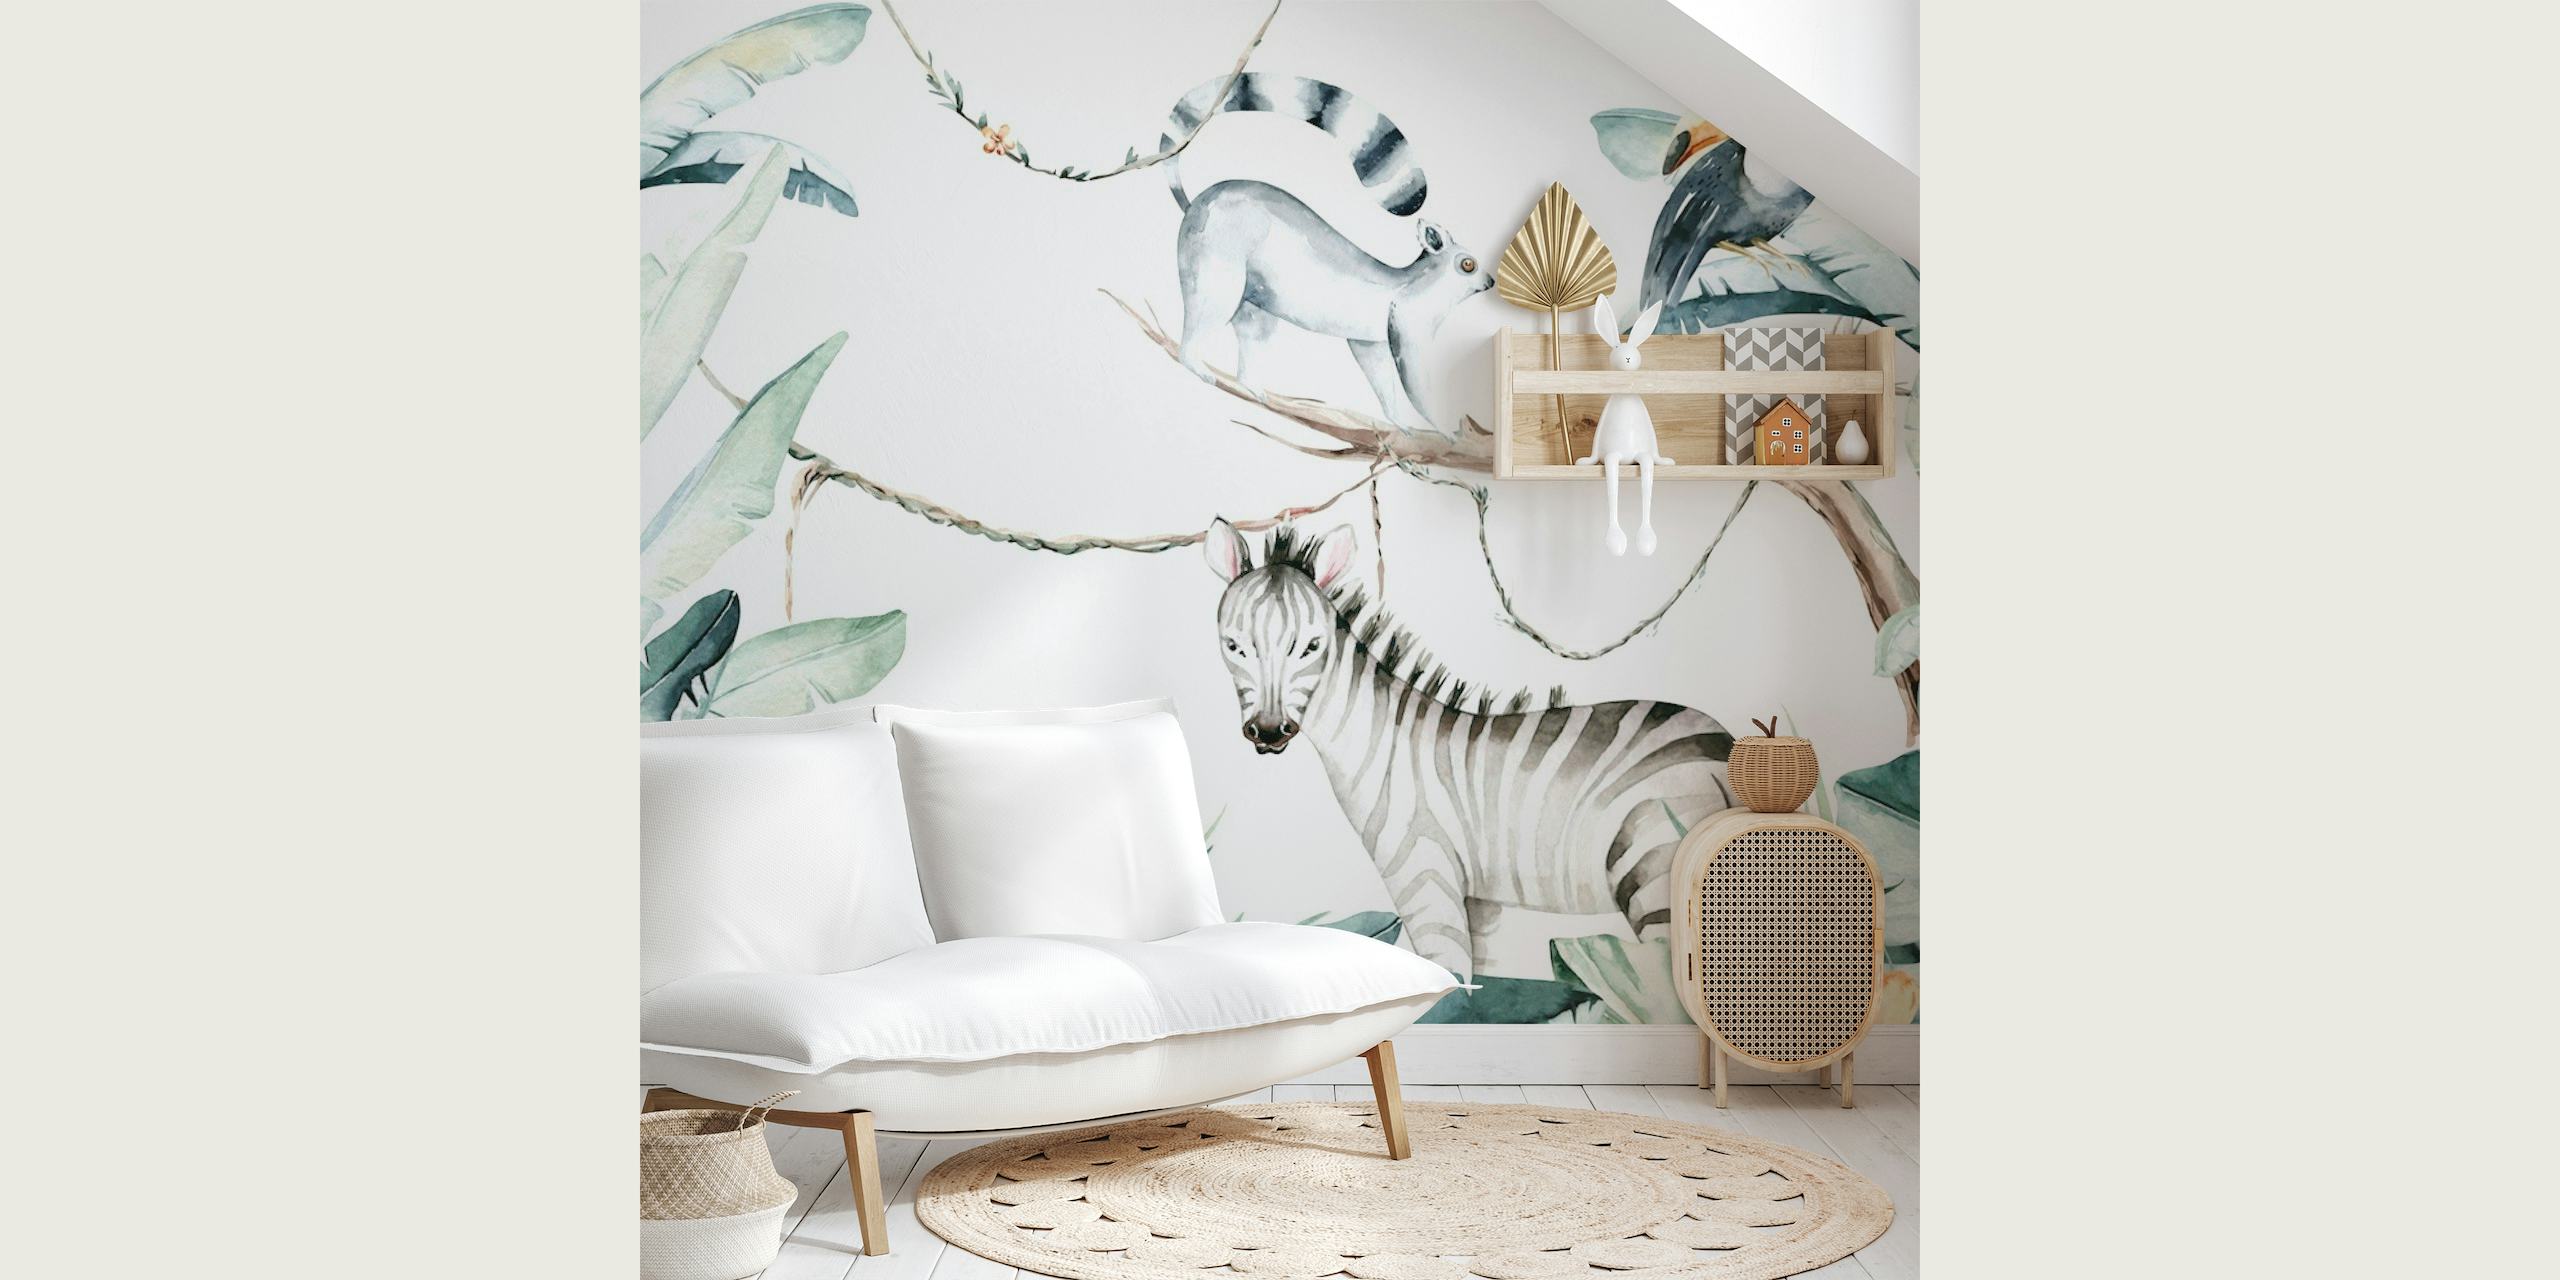 Exotic Madagascar Jungle wall mural with zebra-striped animals and tropical plants